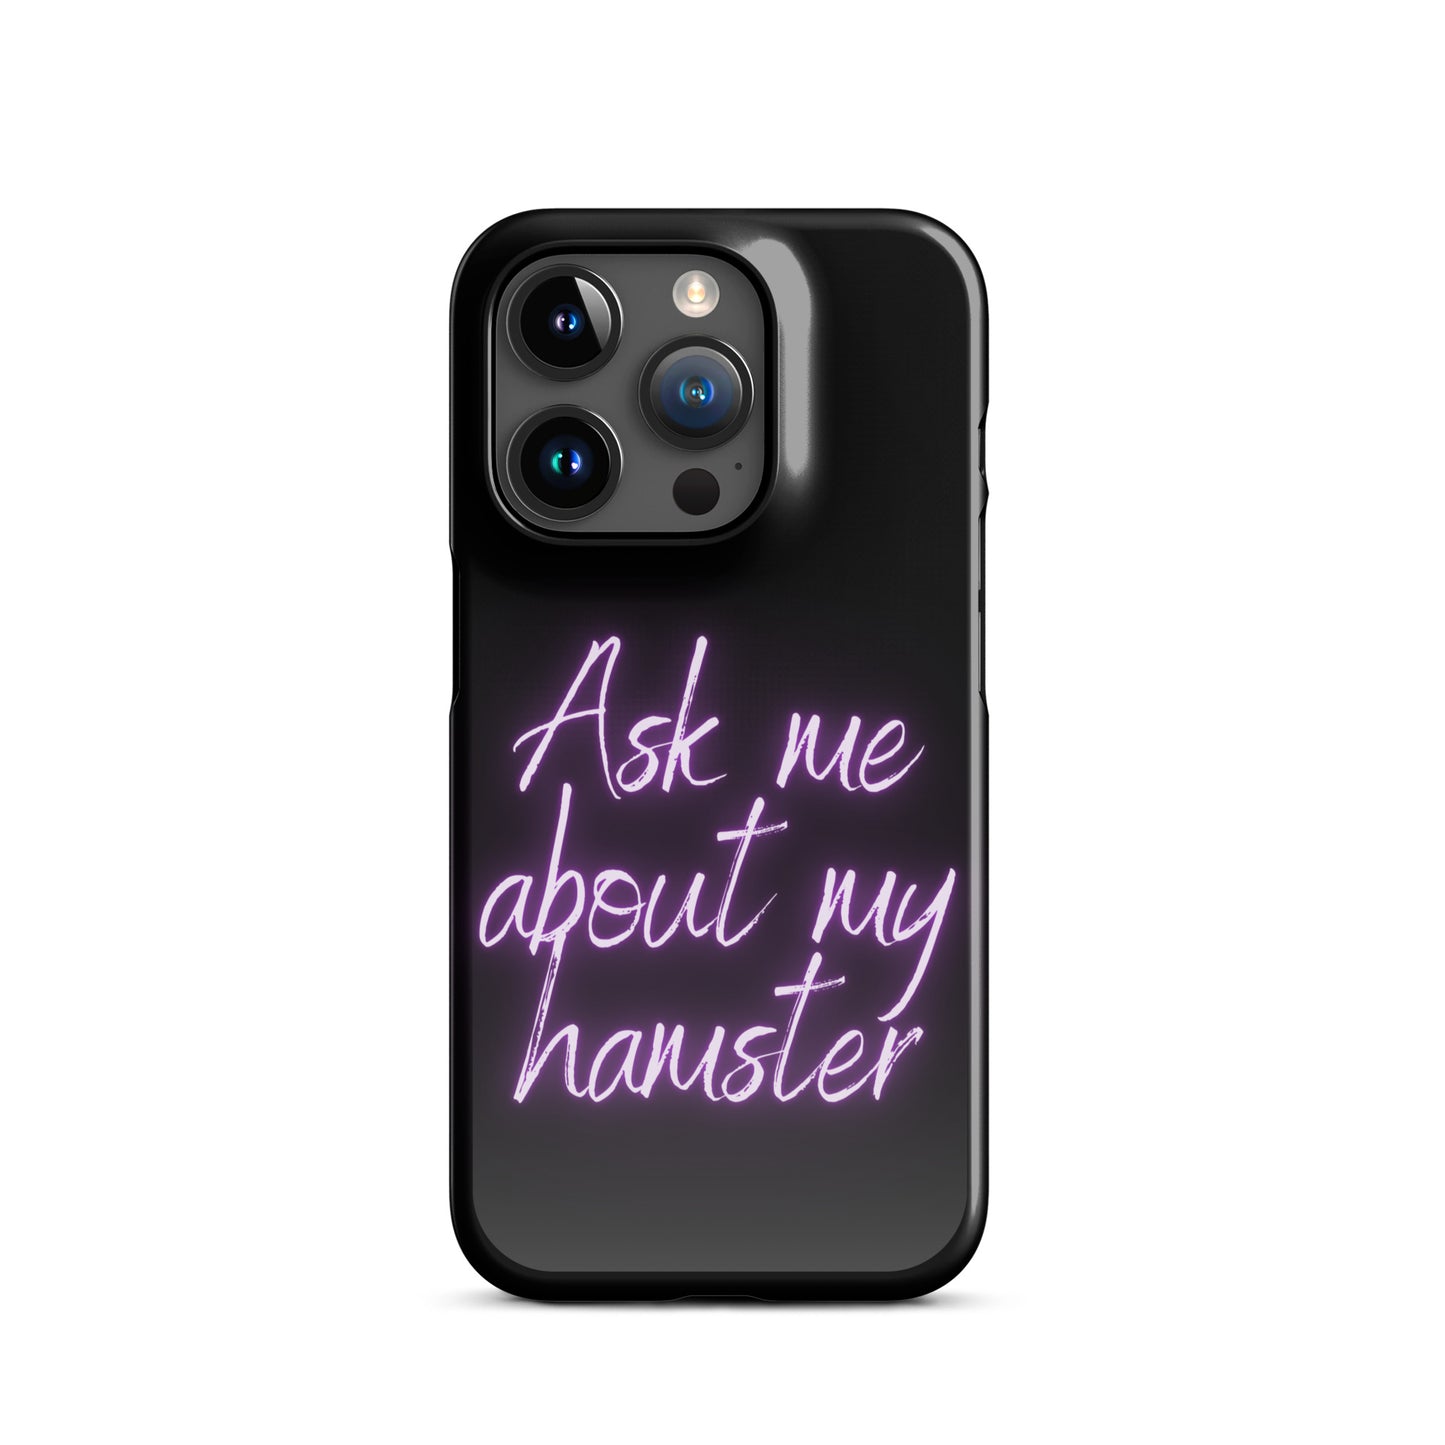 Ask me about my hamster iPhone Case